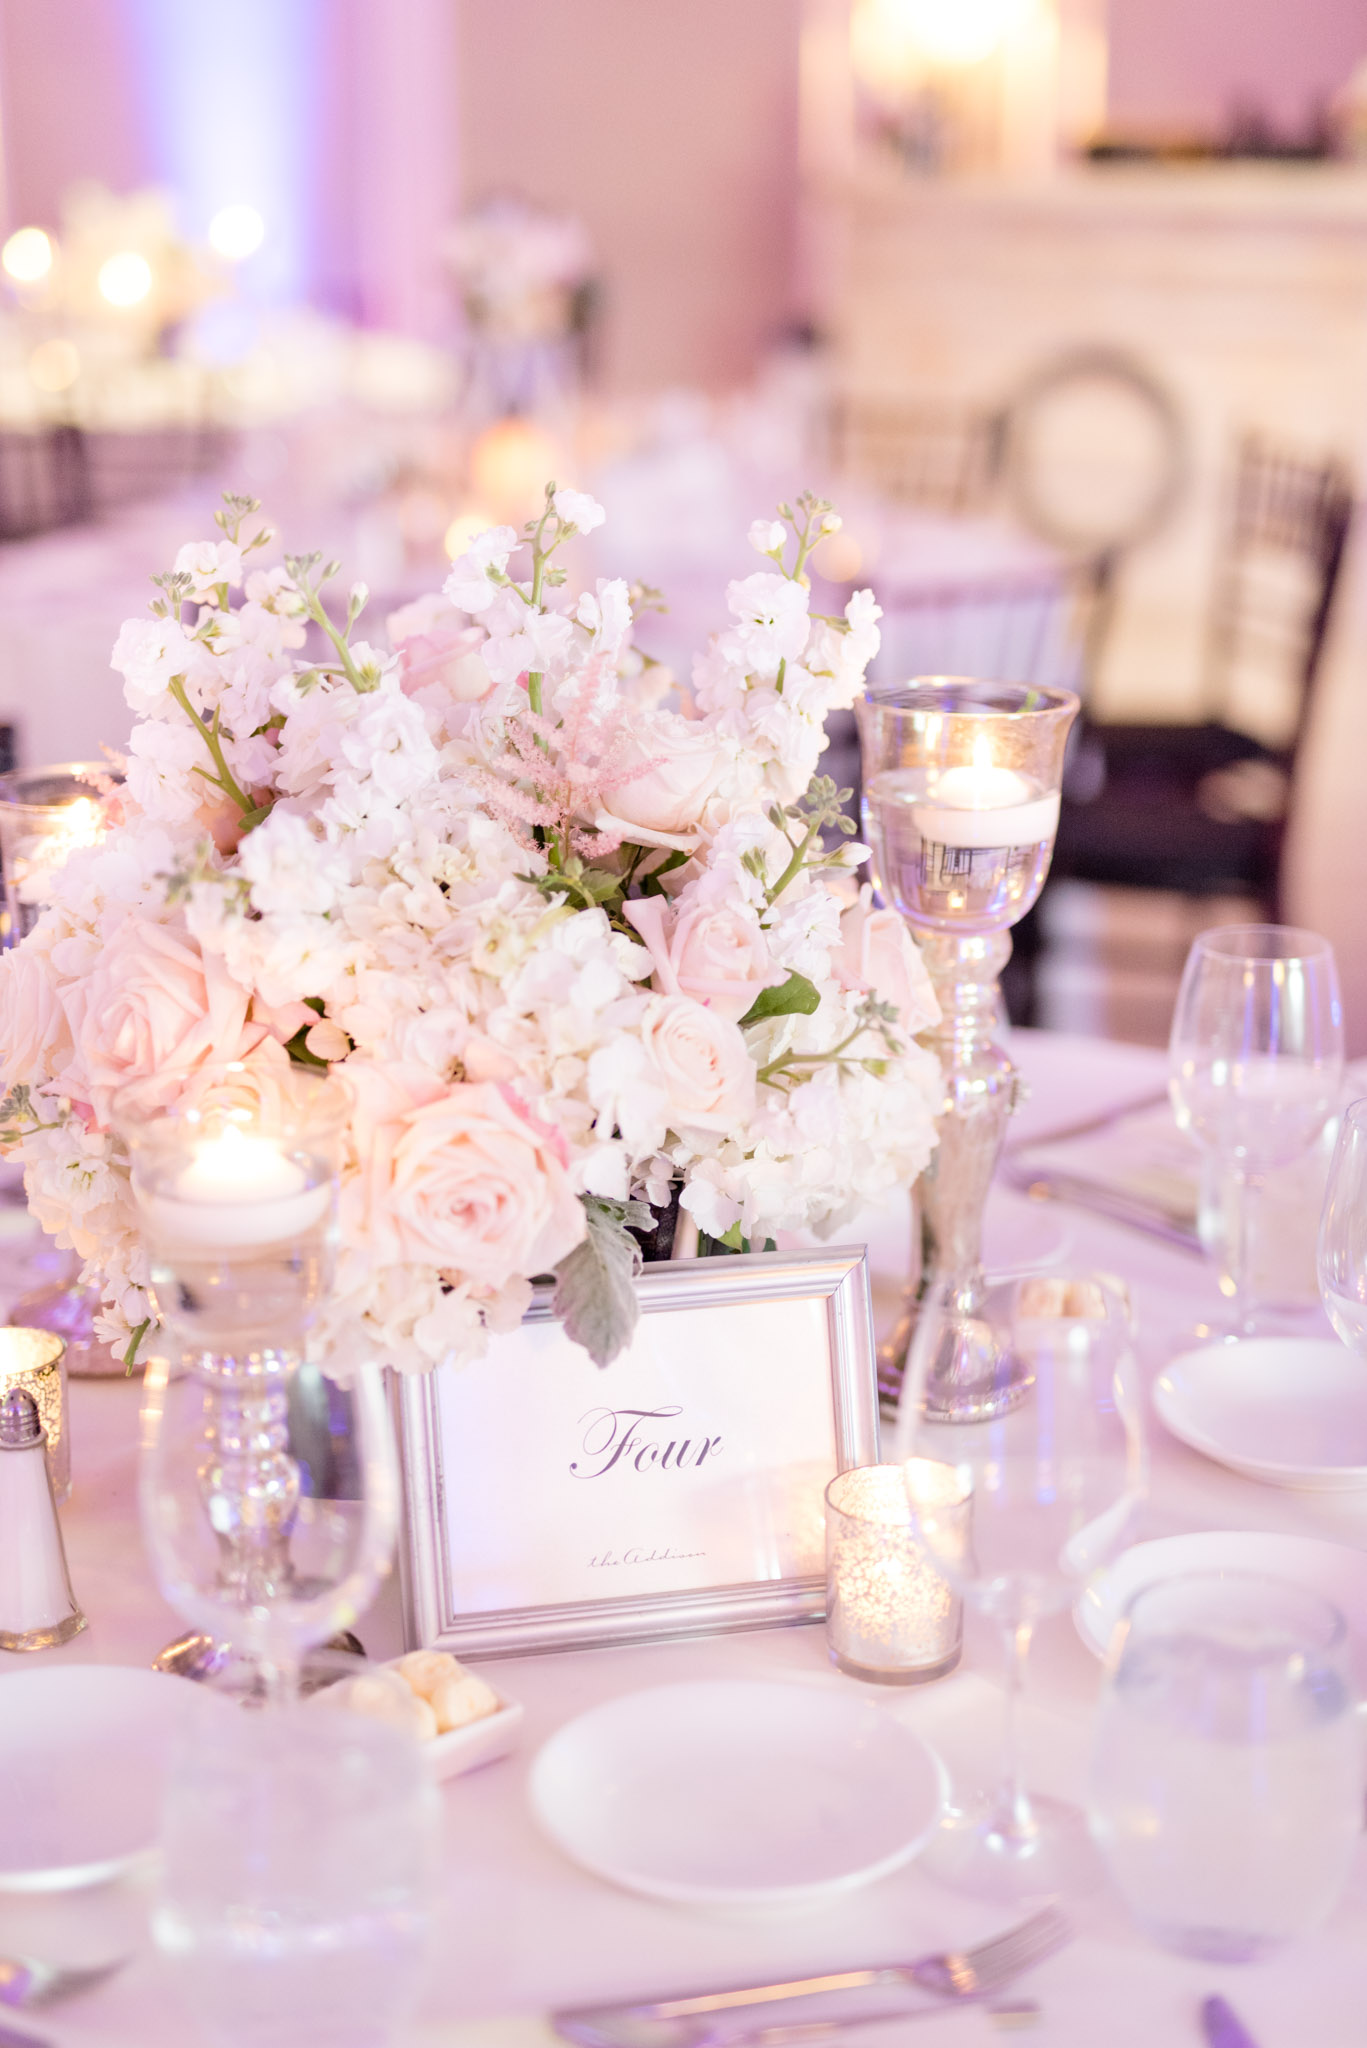 Florals on reception tables.